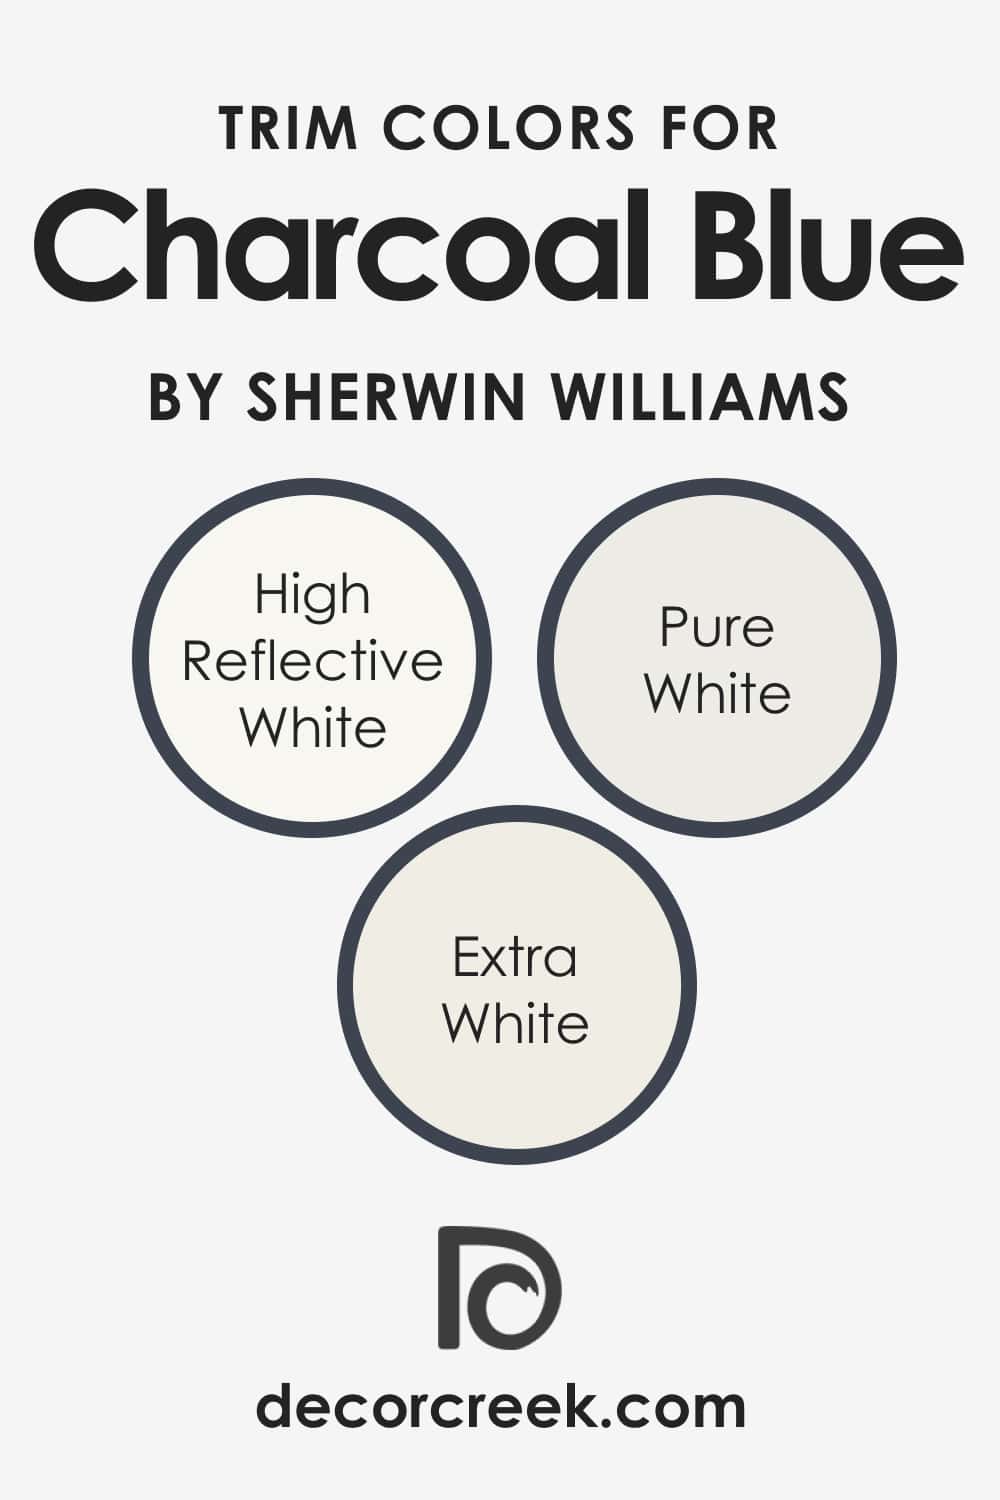 What’s the Best Trim Color For SW Charcoal Blue?